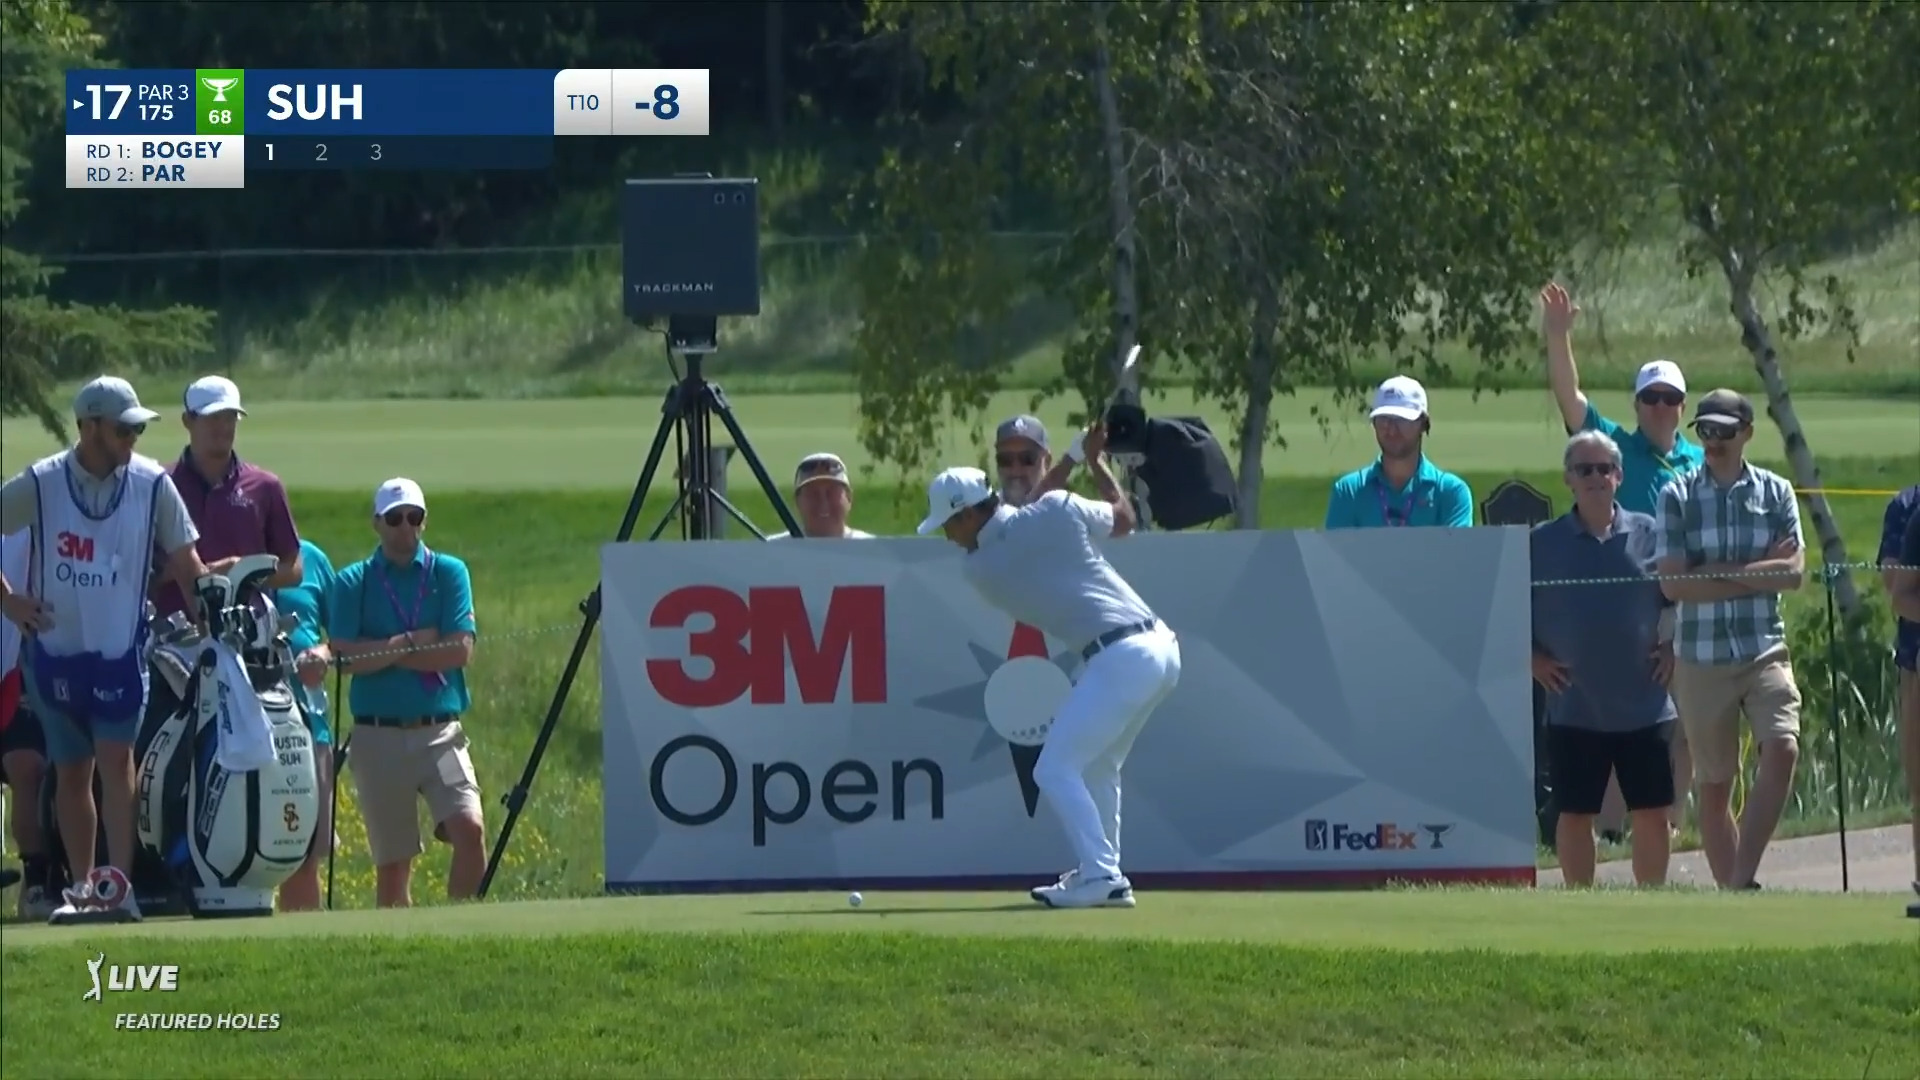 Justin Suh throws a dart to set up birdie at 3M Open